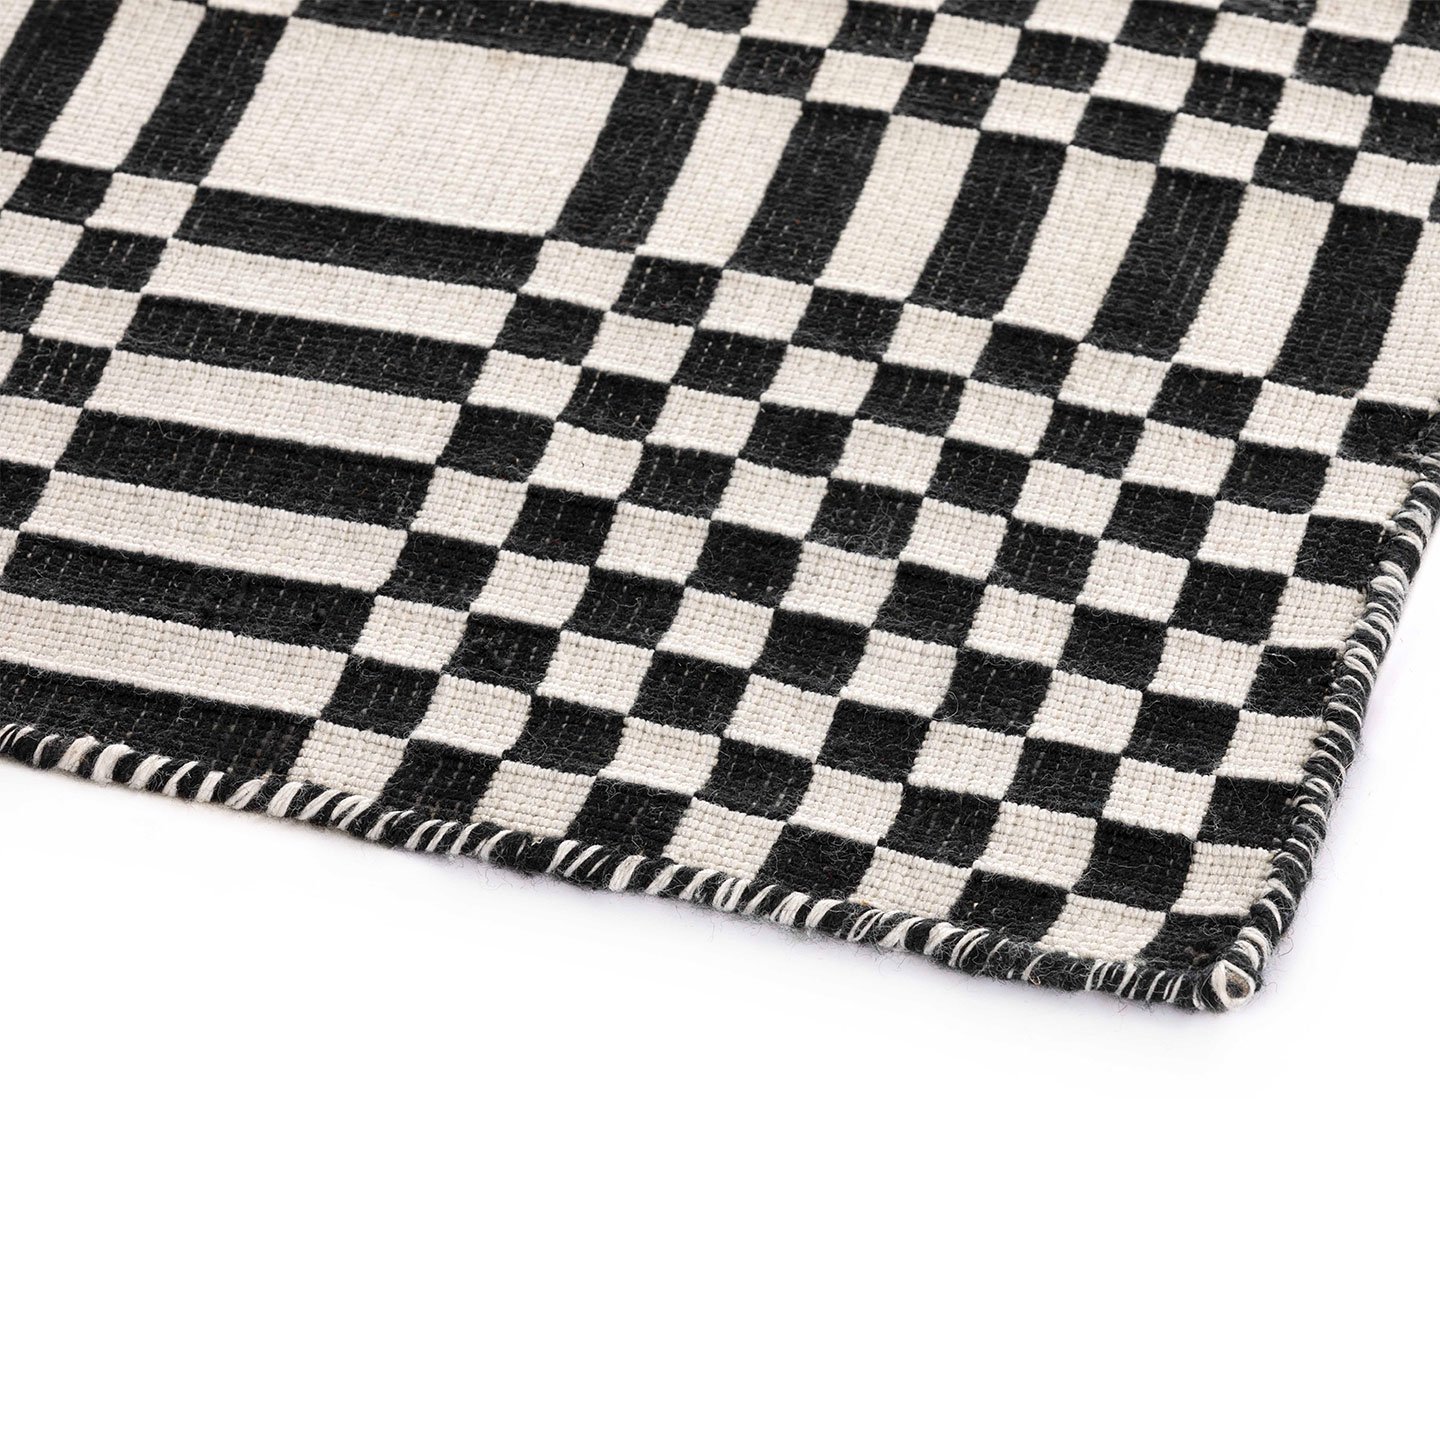 Haworth Patch Rug in black and white with square pattern